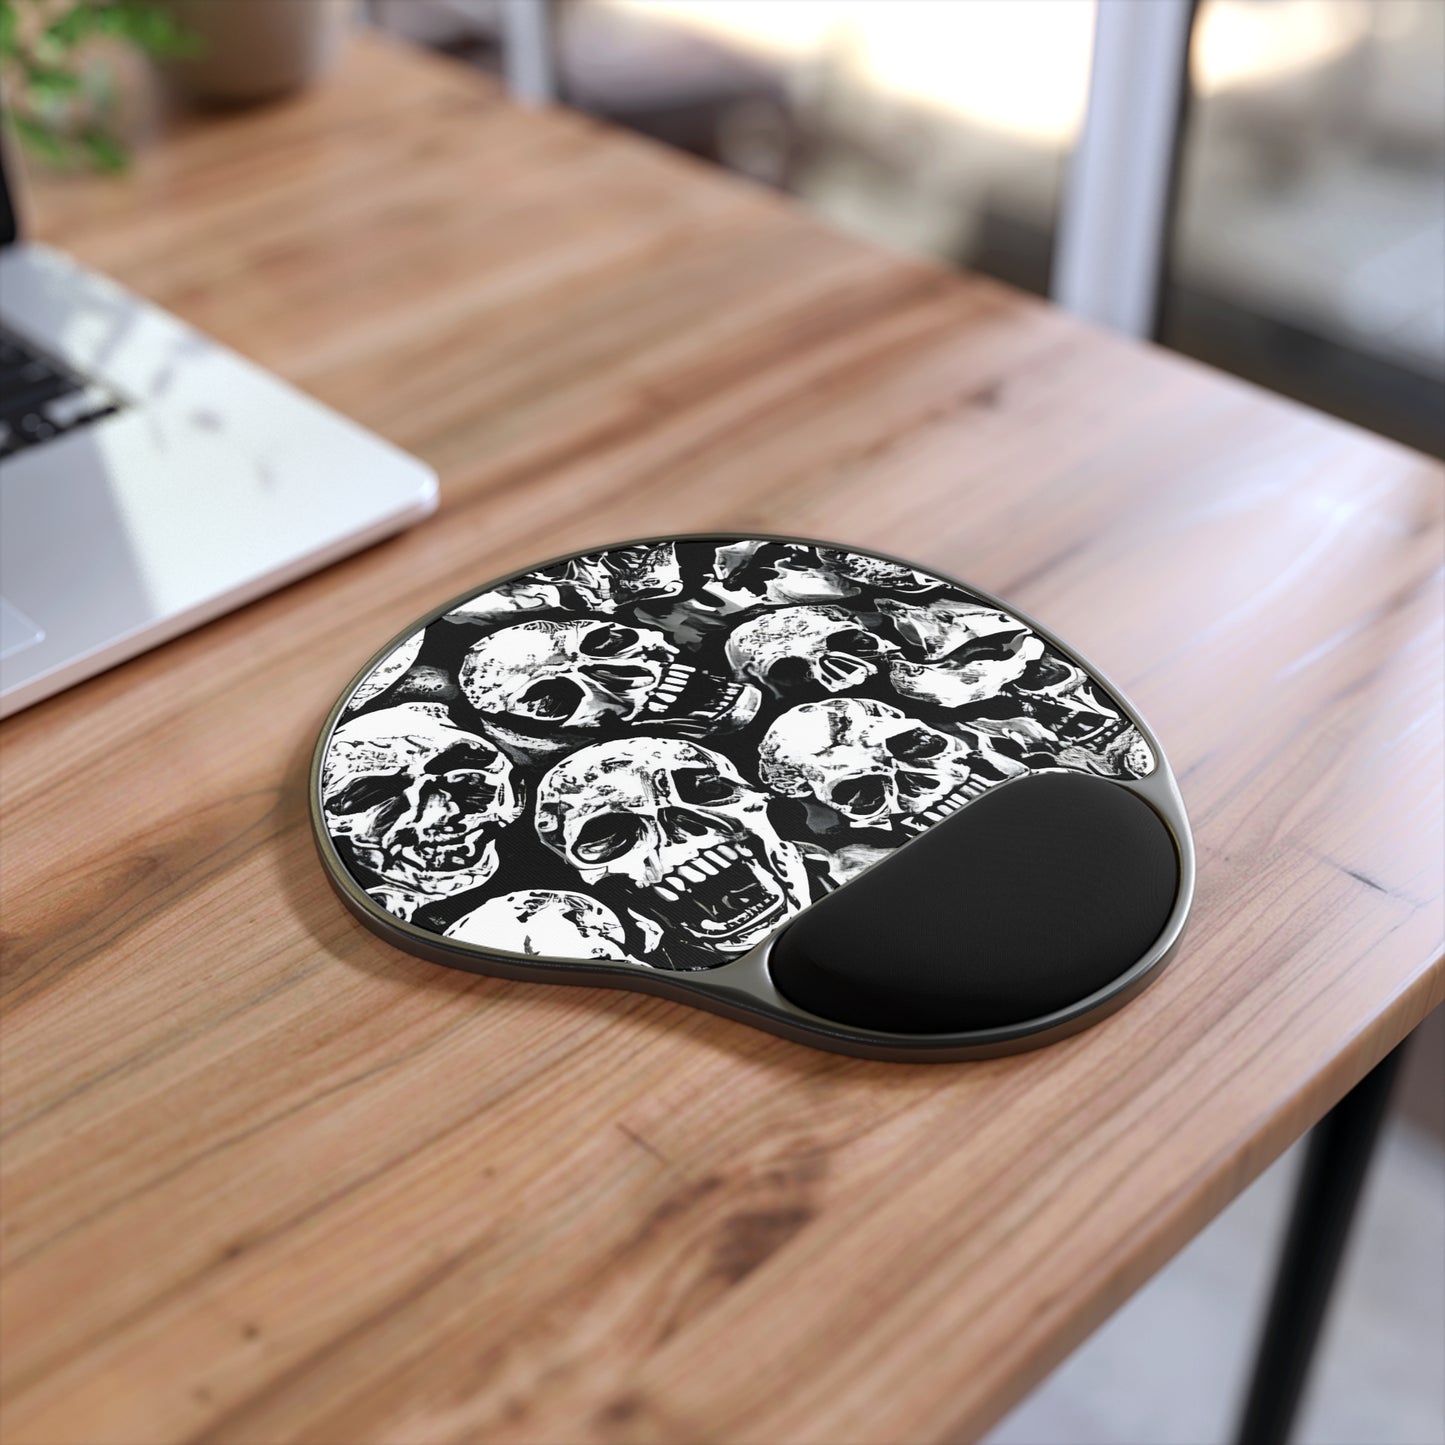 Skull Pile Mouse Pad With Wrist Rest, Memory Foam Wrist Support